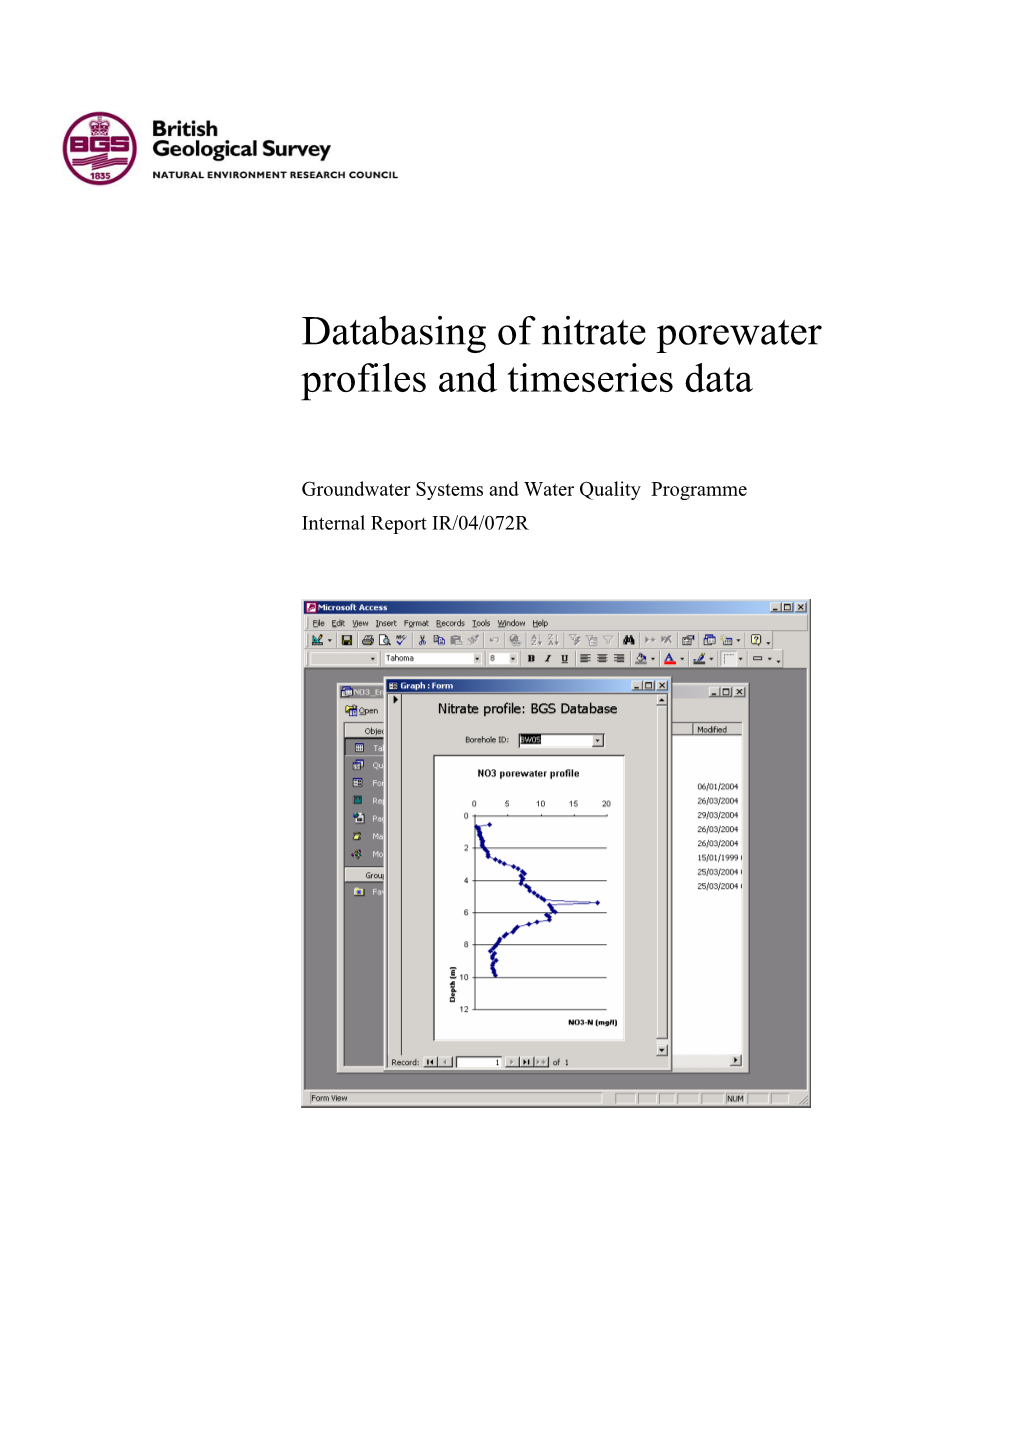 Databasing of Nitrate Porewater Profiles and Timeseries Data